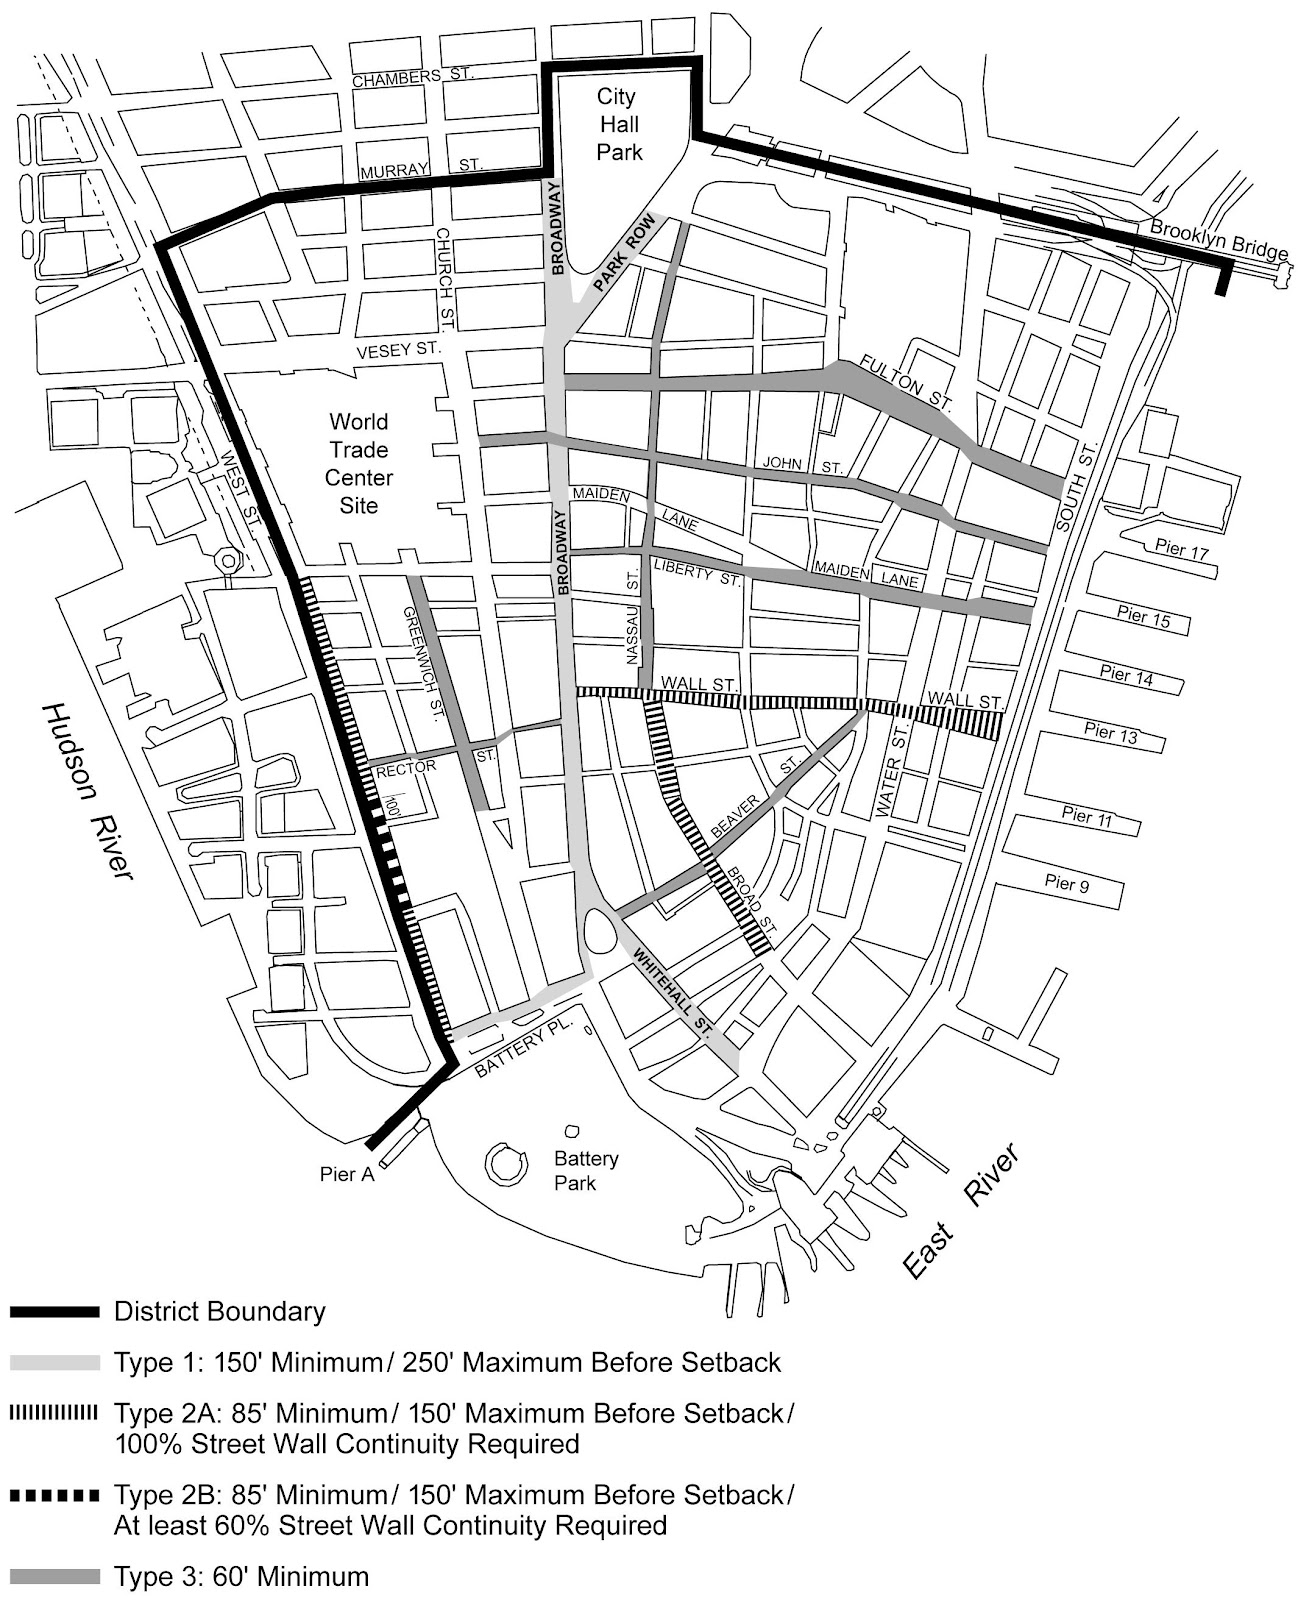 Zoning Resolutions Chapter 1: Special Lower Manhattan District Appendix A.1